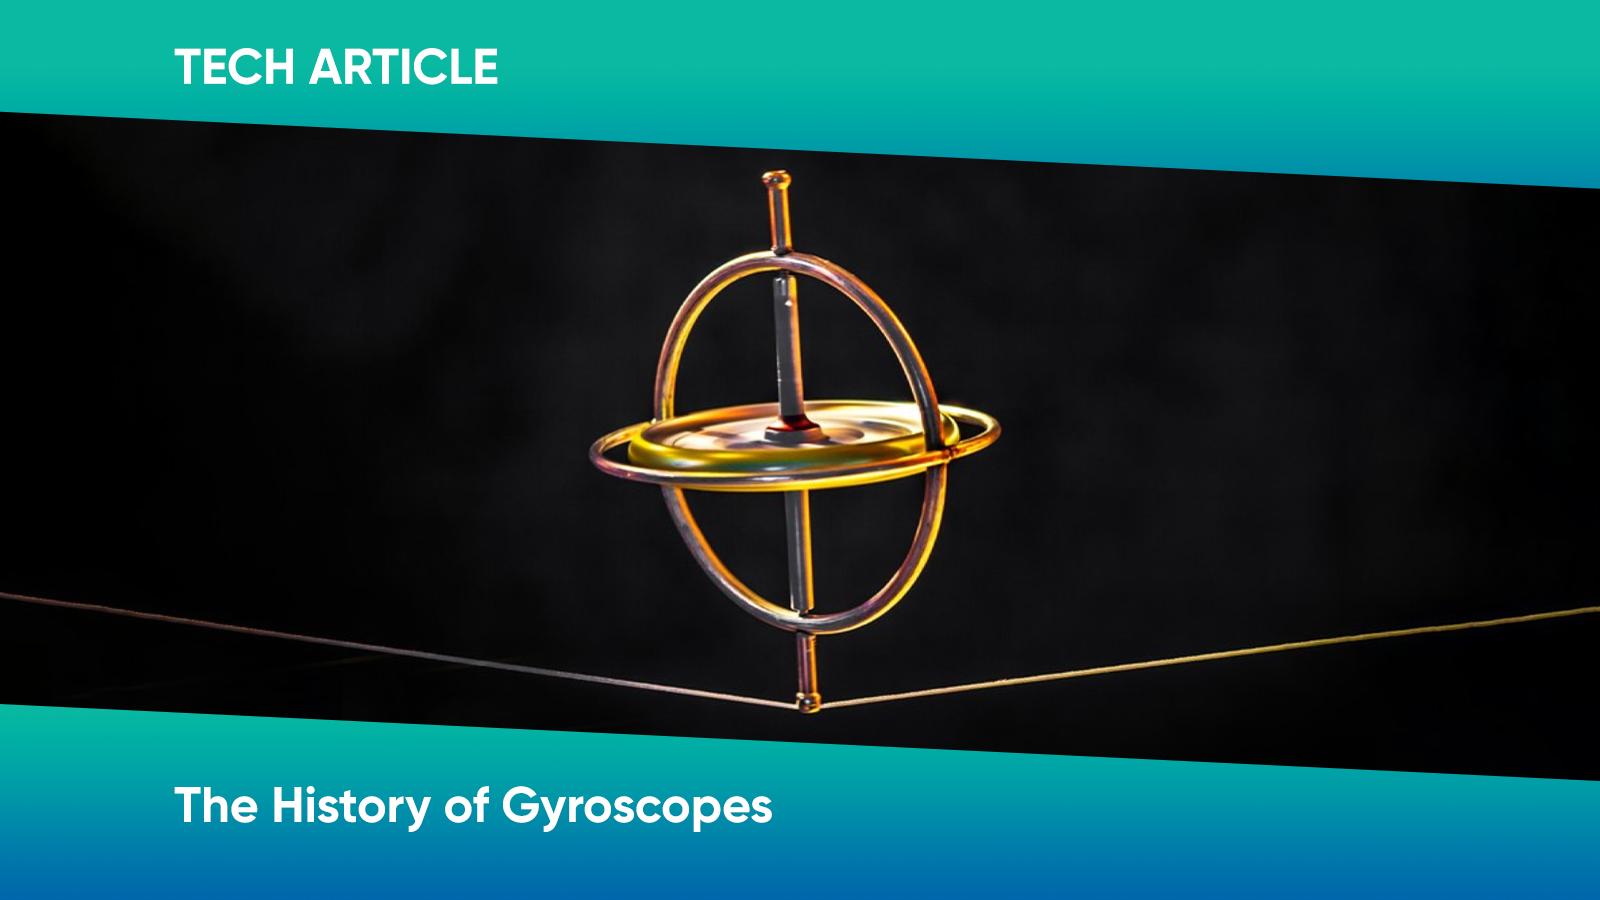 Tech Article | The History of Gyroscopes